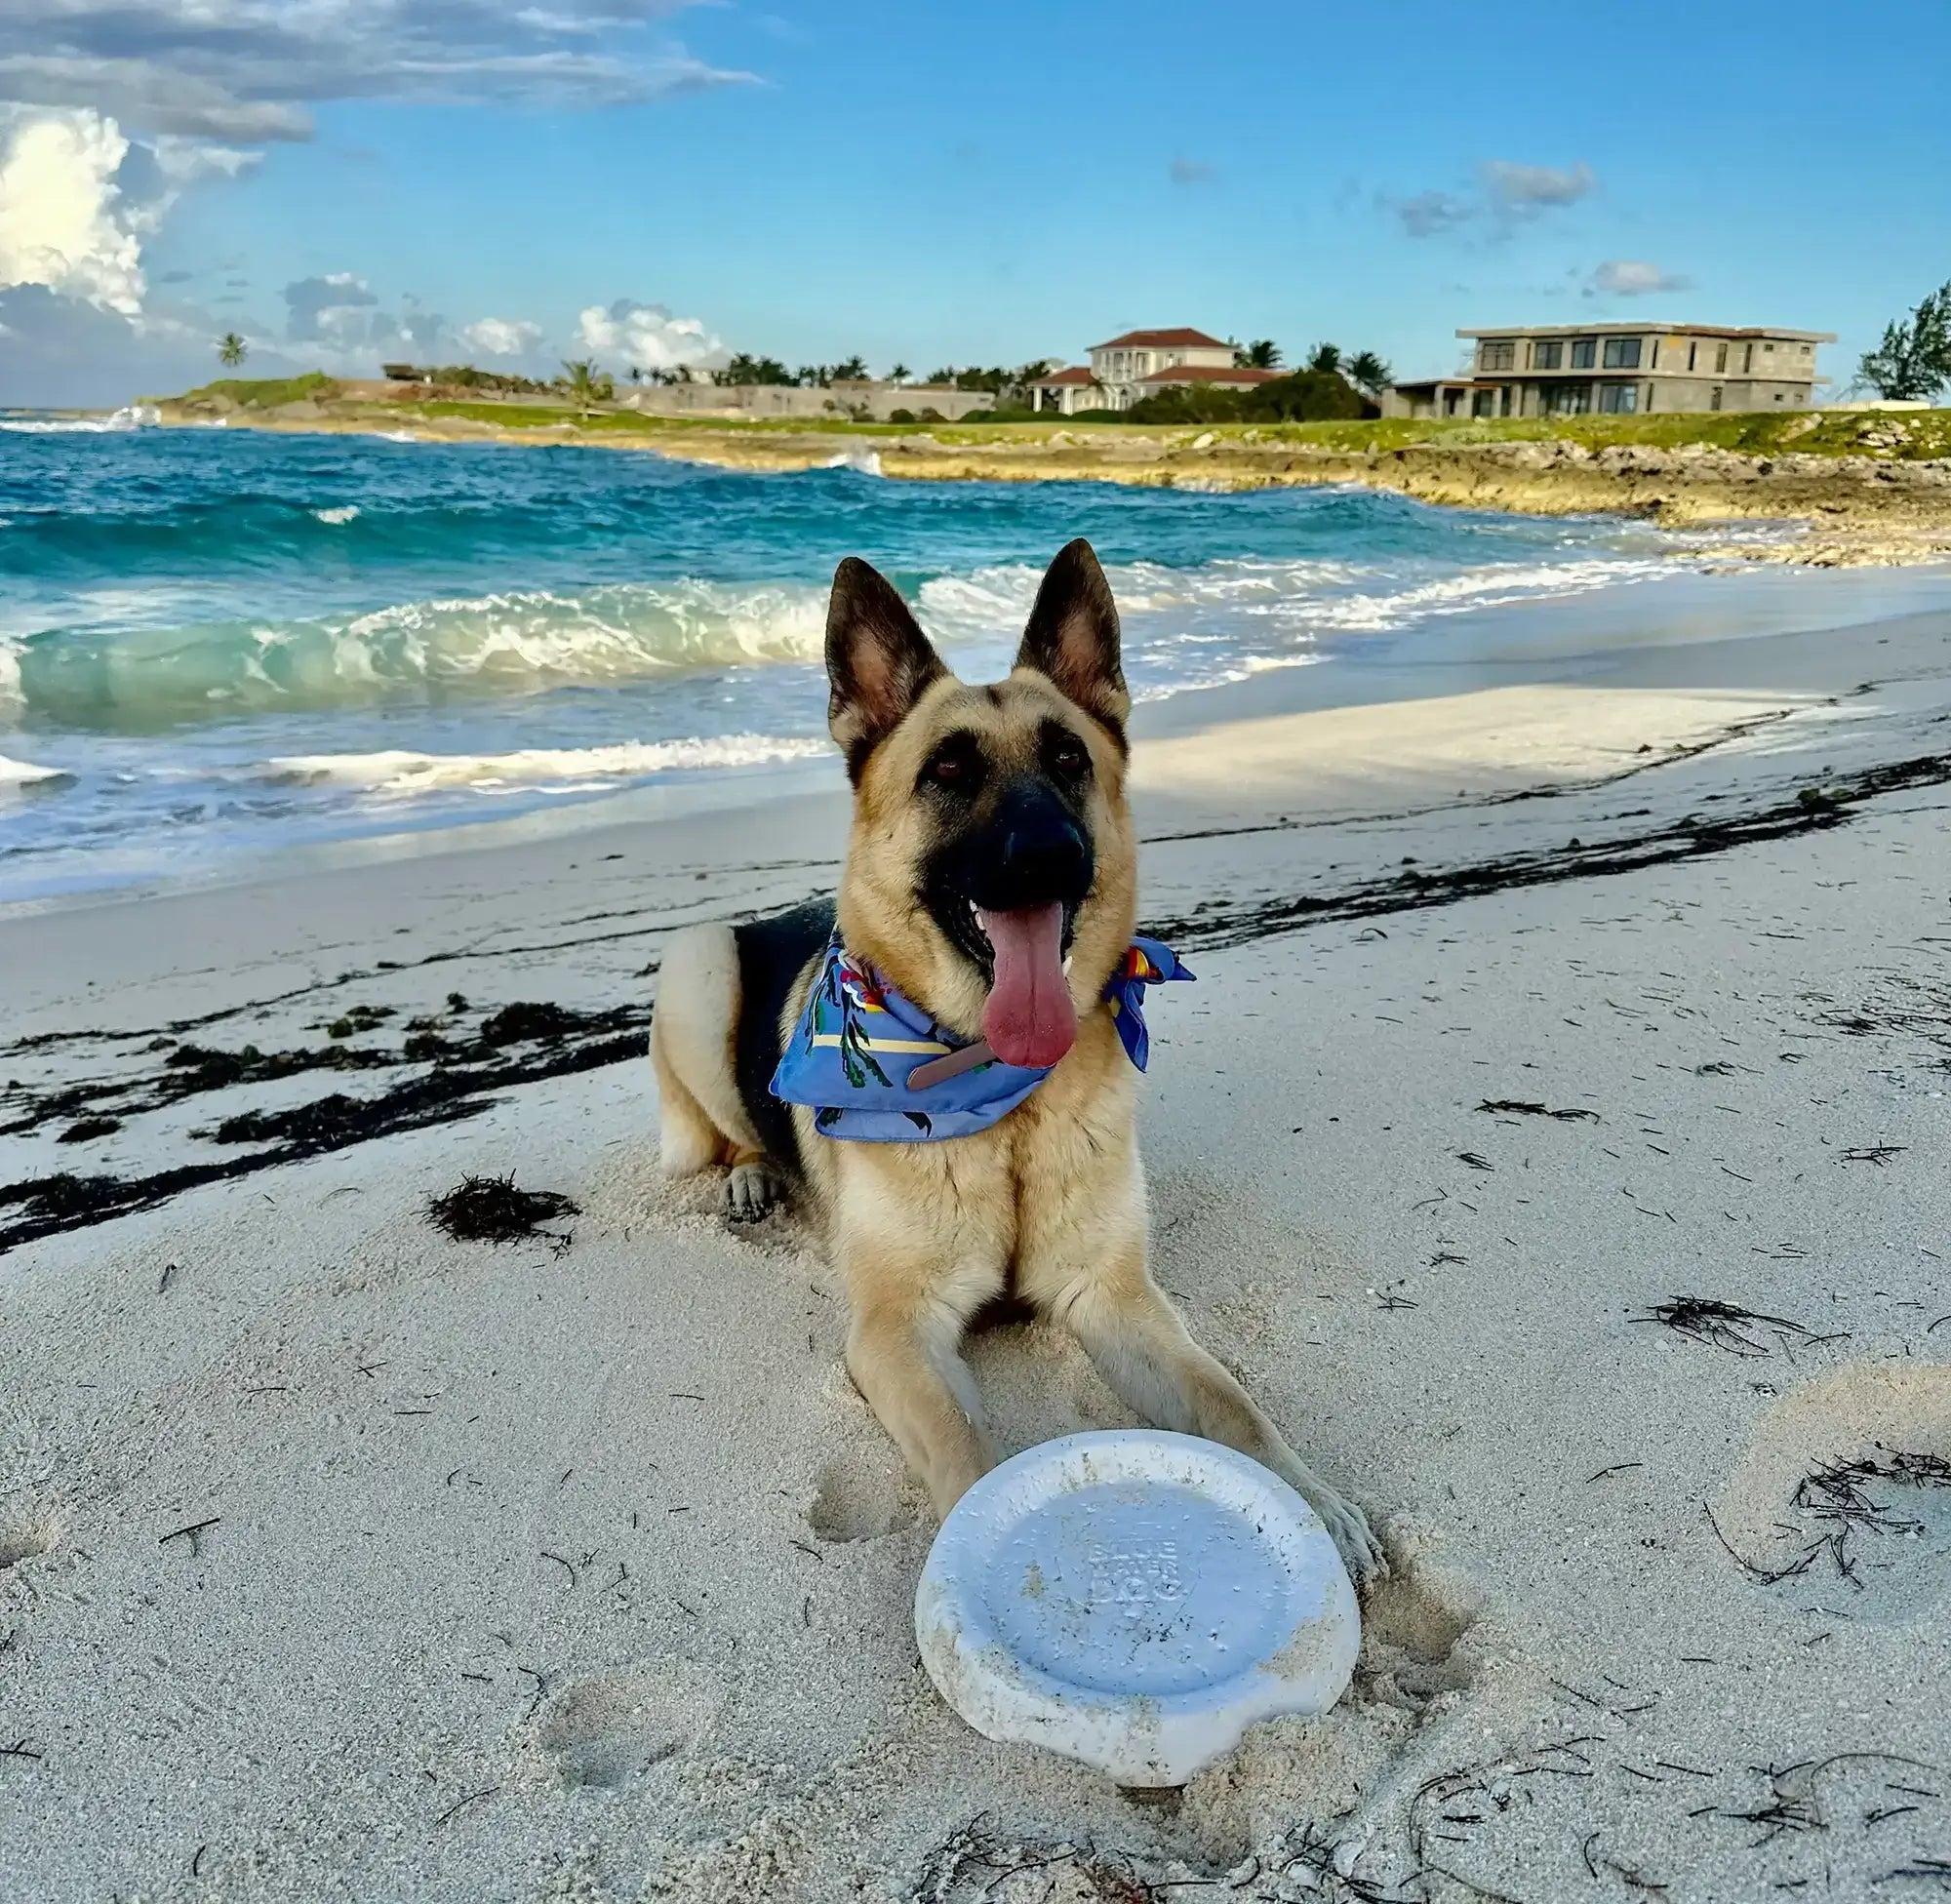 German Shepherd laying on the beach with a white dog frisbee in front of it.